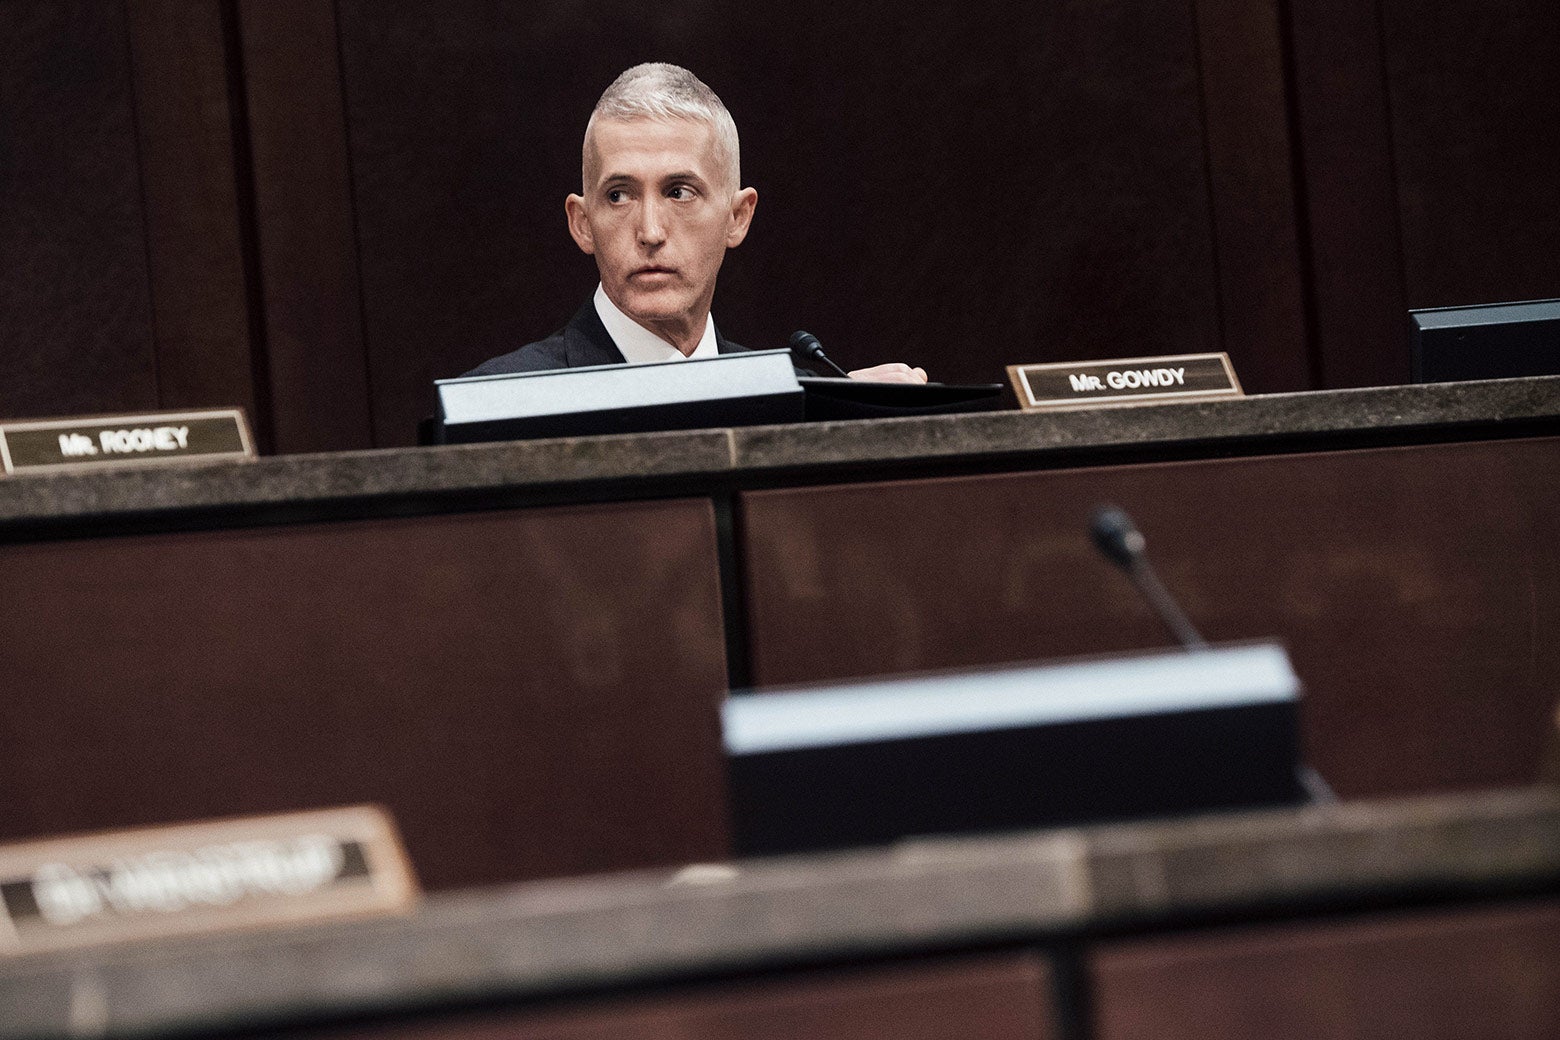 South Carolina Rep. Trey Gowdy waits for former CIA Director John Brennan to testify during a House Permanent Select Committee on Intelligence hearing on May 23, 2017, in Washington.